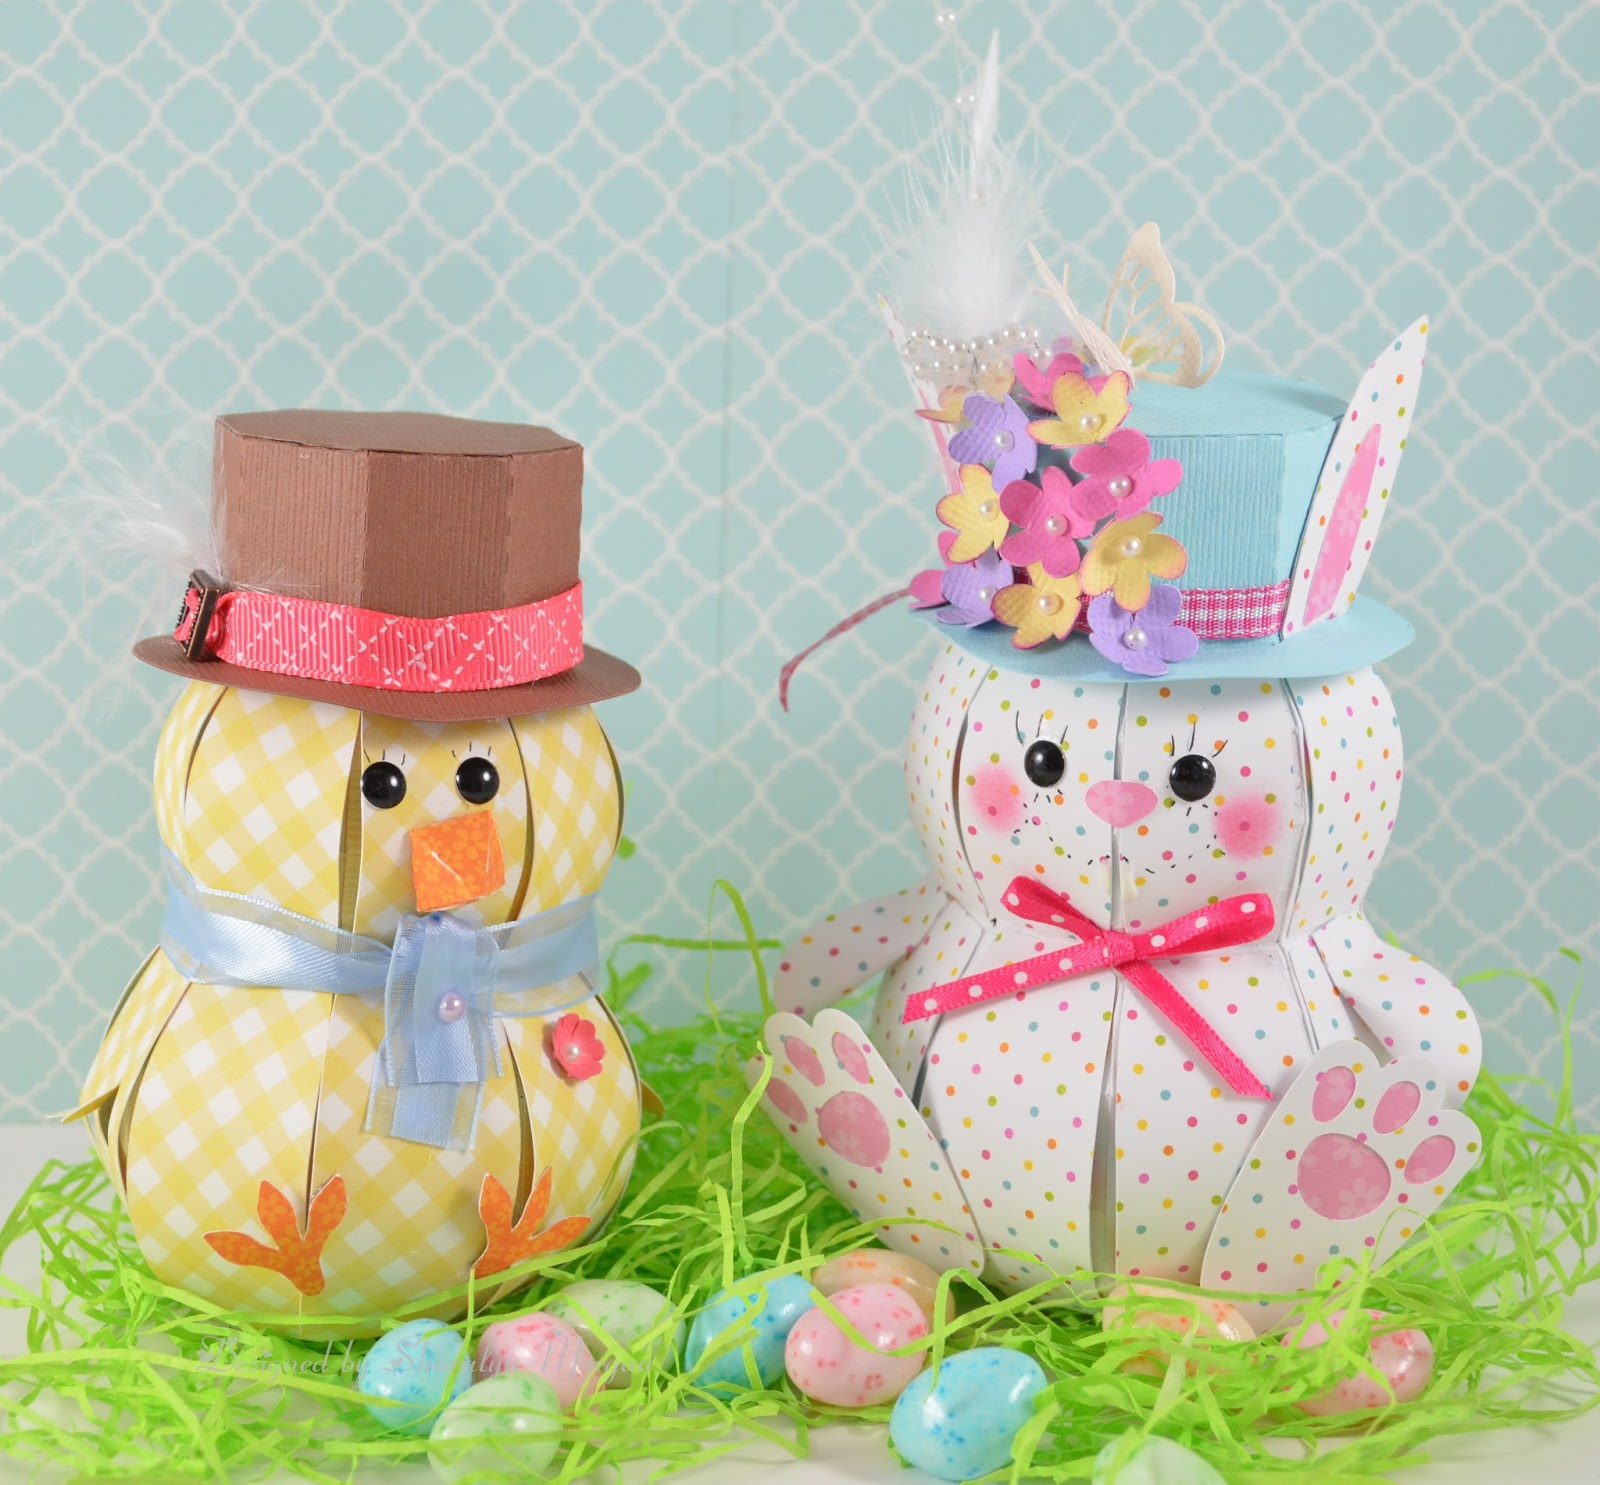 Download Sharas Paper Creations: Easter Parade